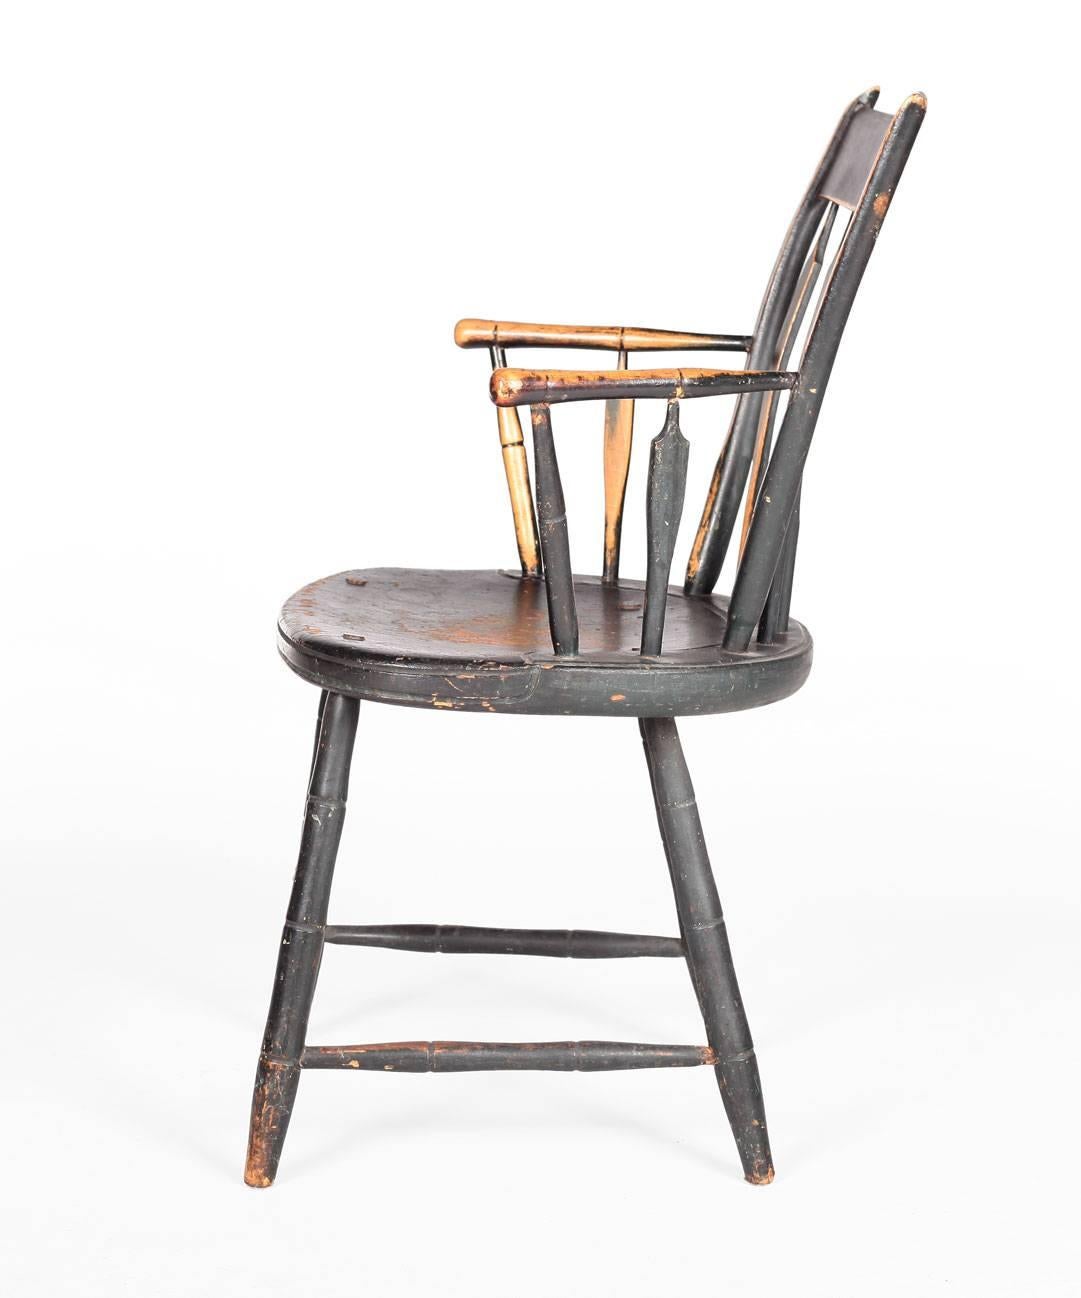 American Colonial Antique American Windsor Chair with Original Paint, 19th Century For Sale